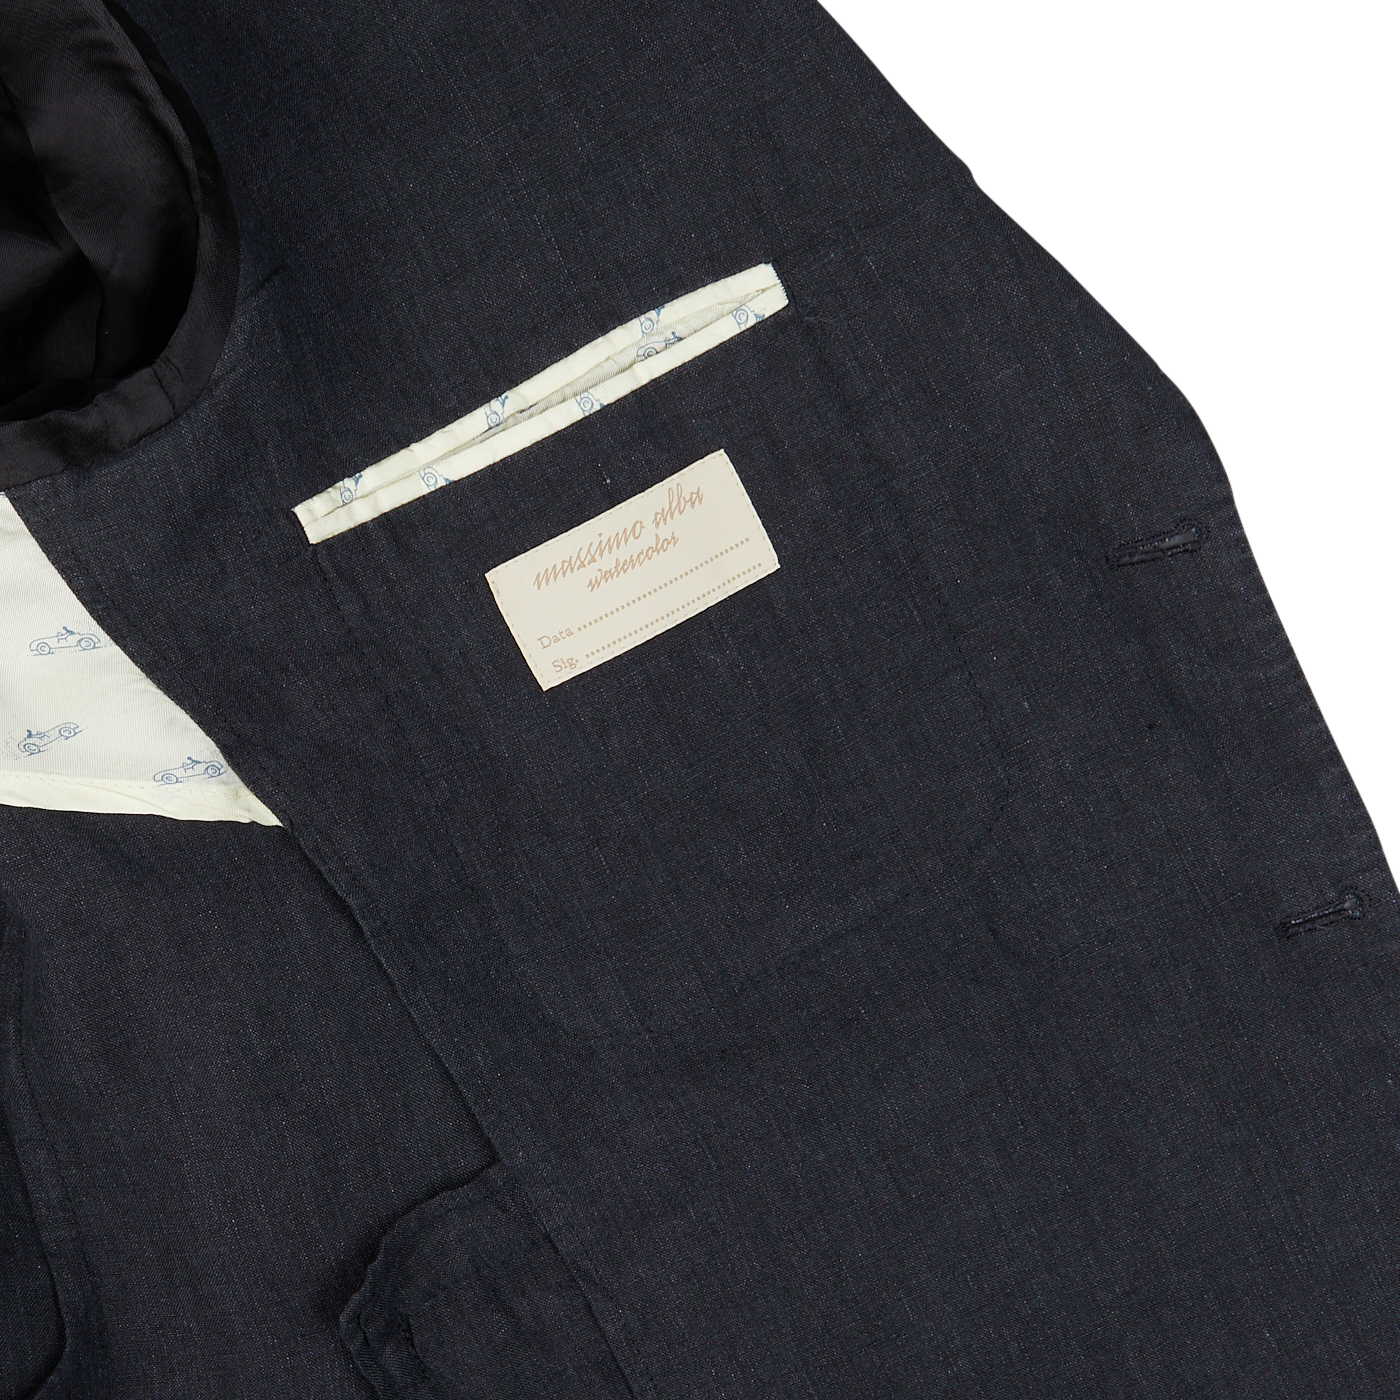 Close-up of a black Massimo Alba linen blazer with a designer label and patterned lining.